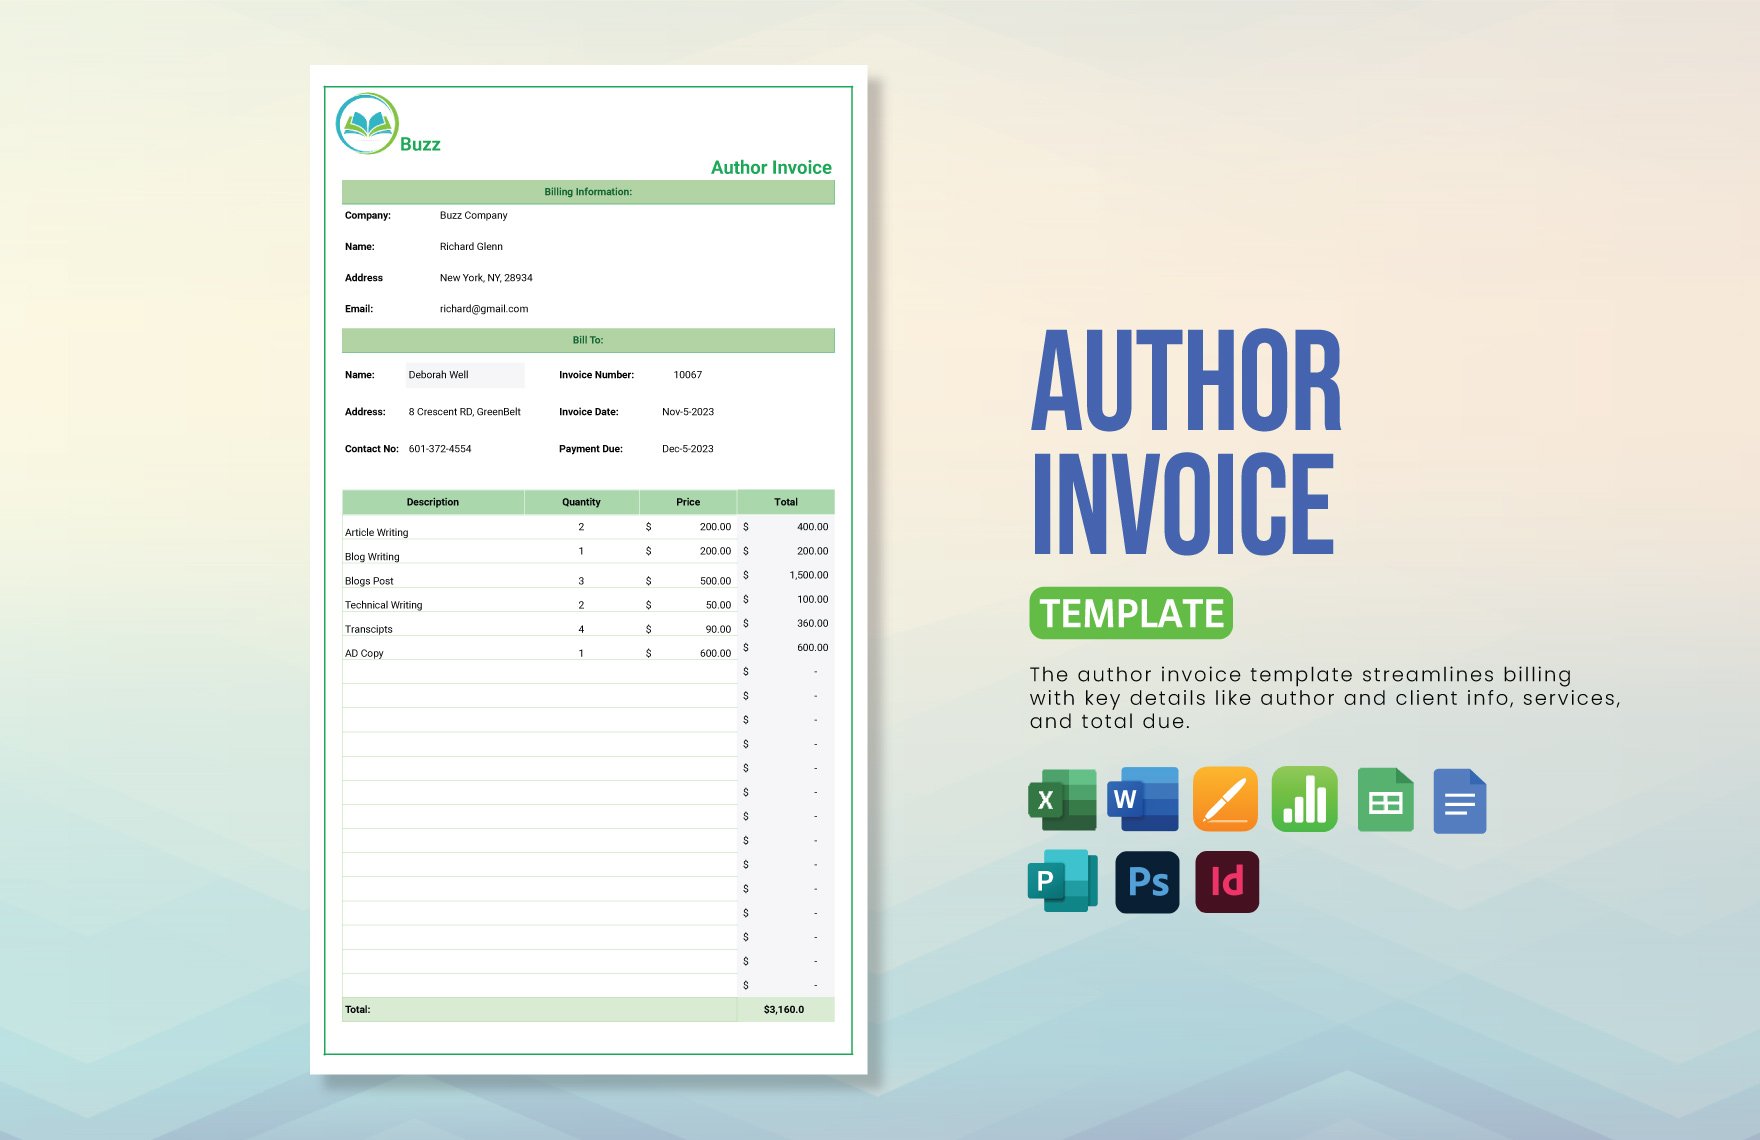 Author Invoice Template in Word, Google Docs, Excel, PDF, Google Sheets, Illustrator, PSD, Apple Pages, InDesign, Apple Numbers